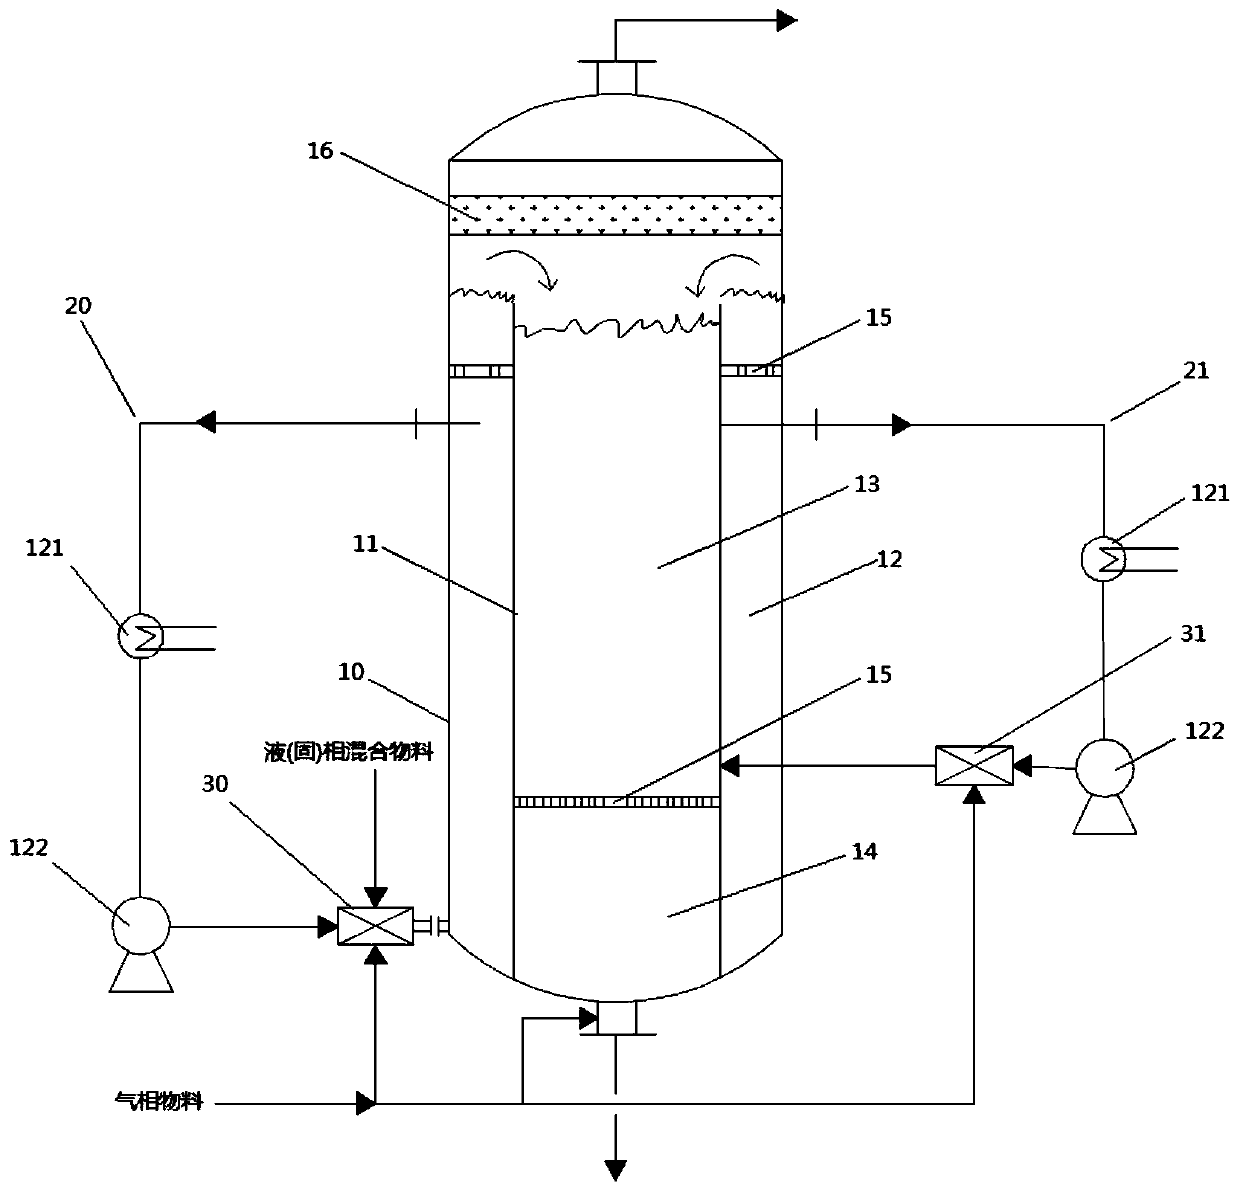 External micro-interface unit enhanced oxidation system for producing PTA from PX